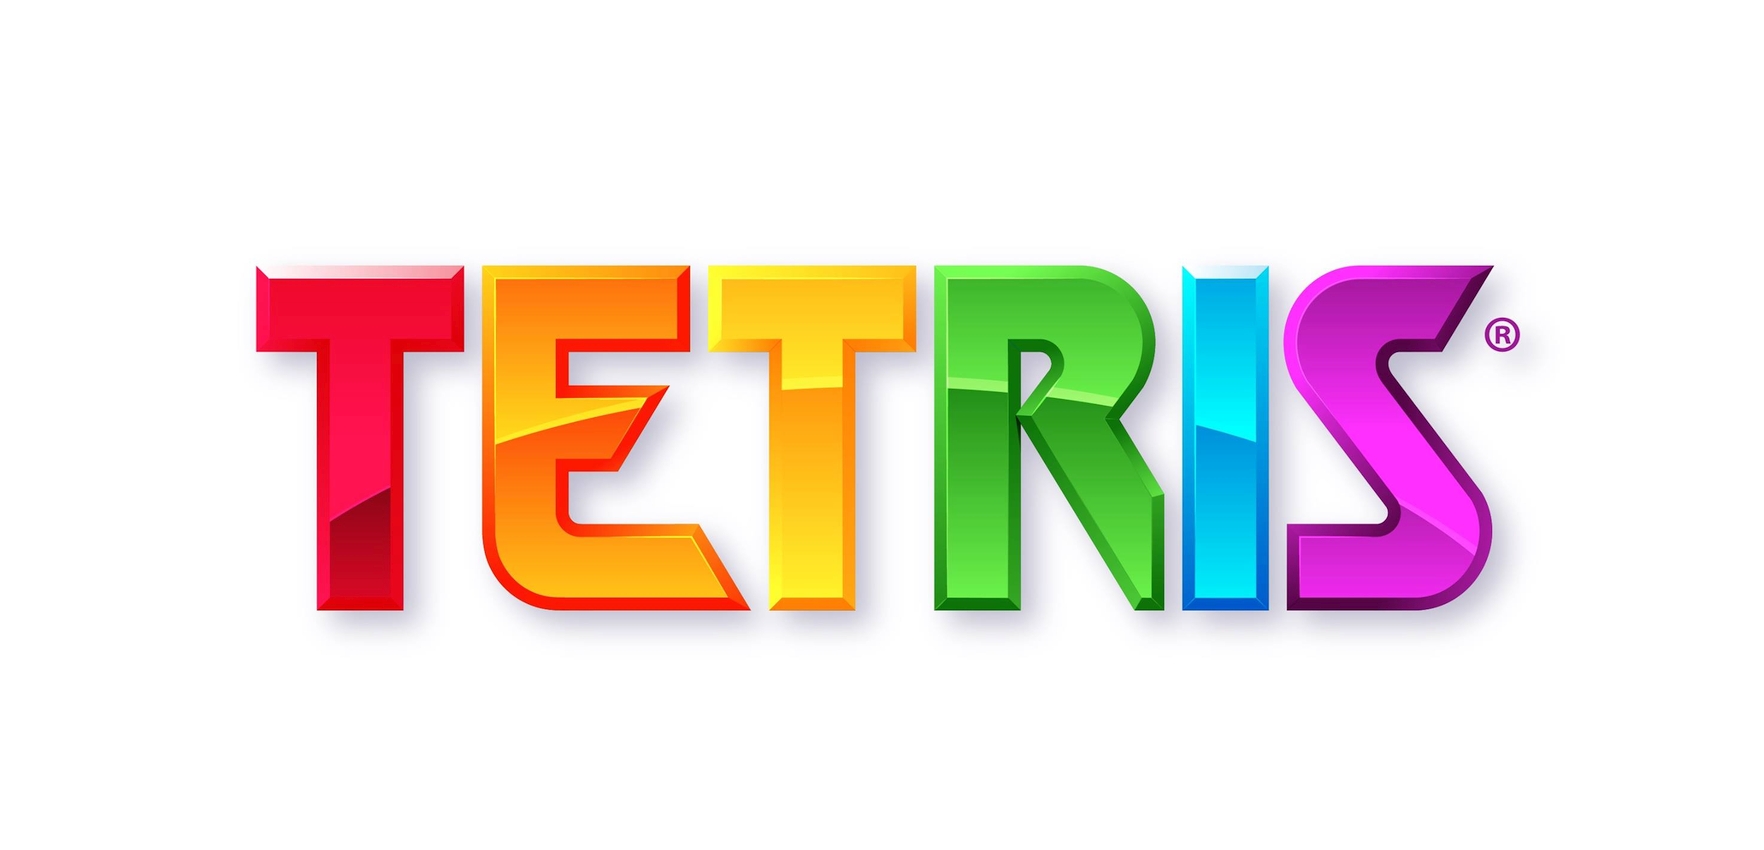 EA’s Tetris Mobile Game Ceasing Support And Access This April